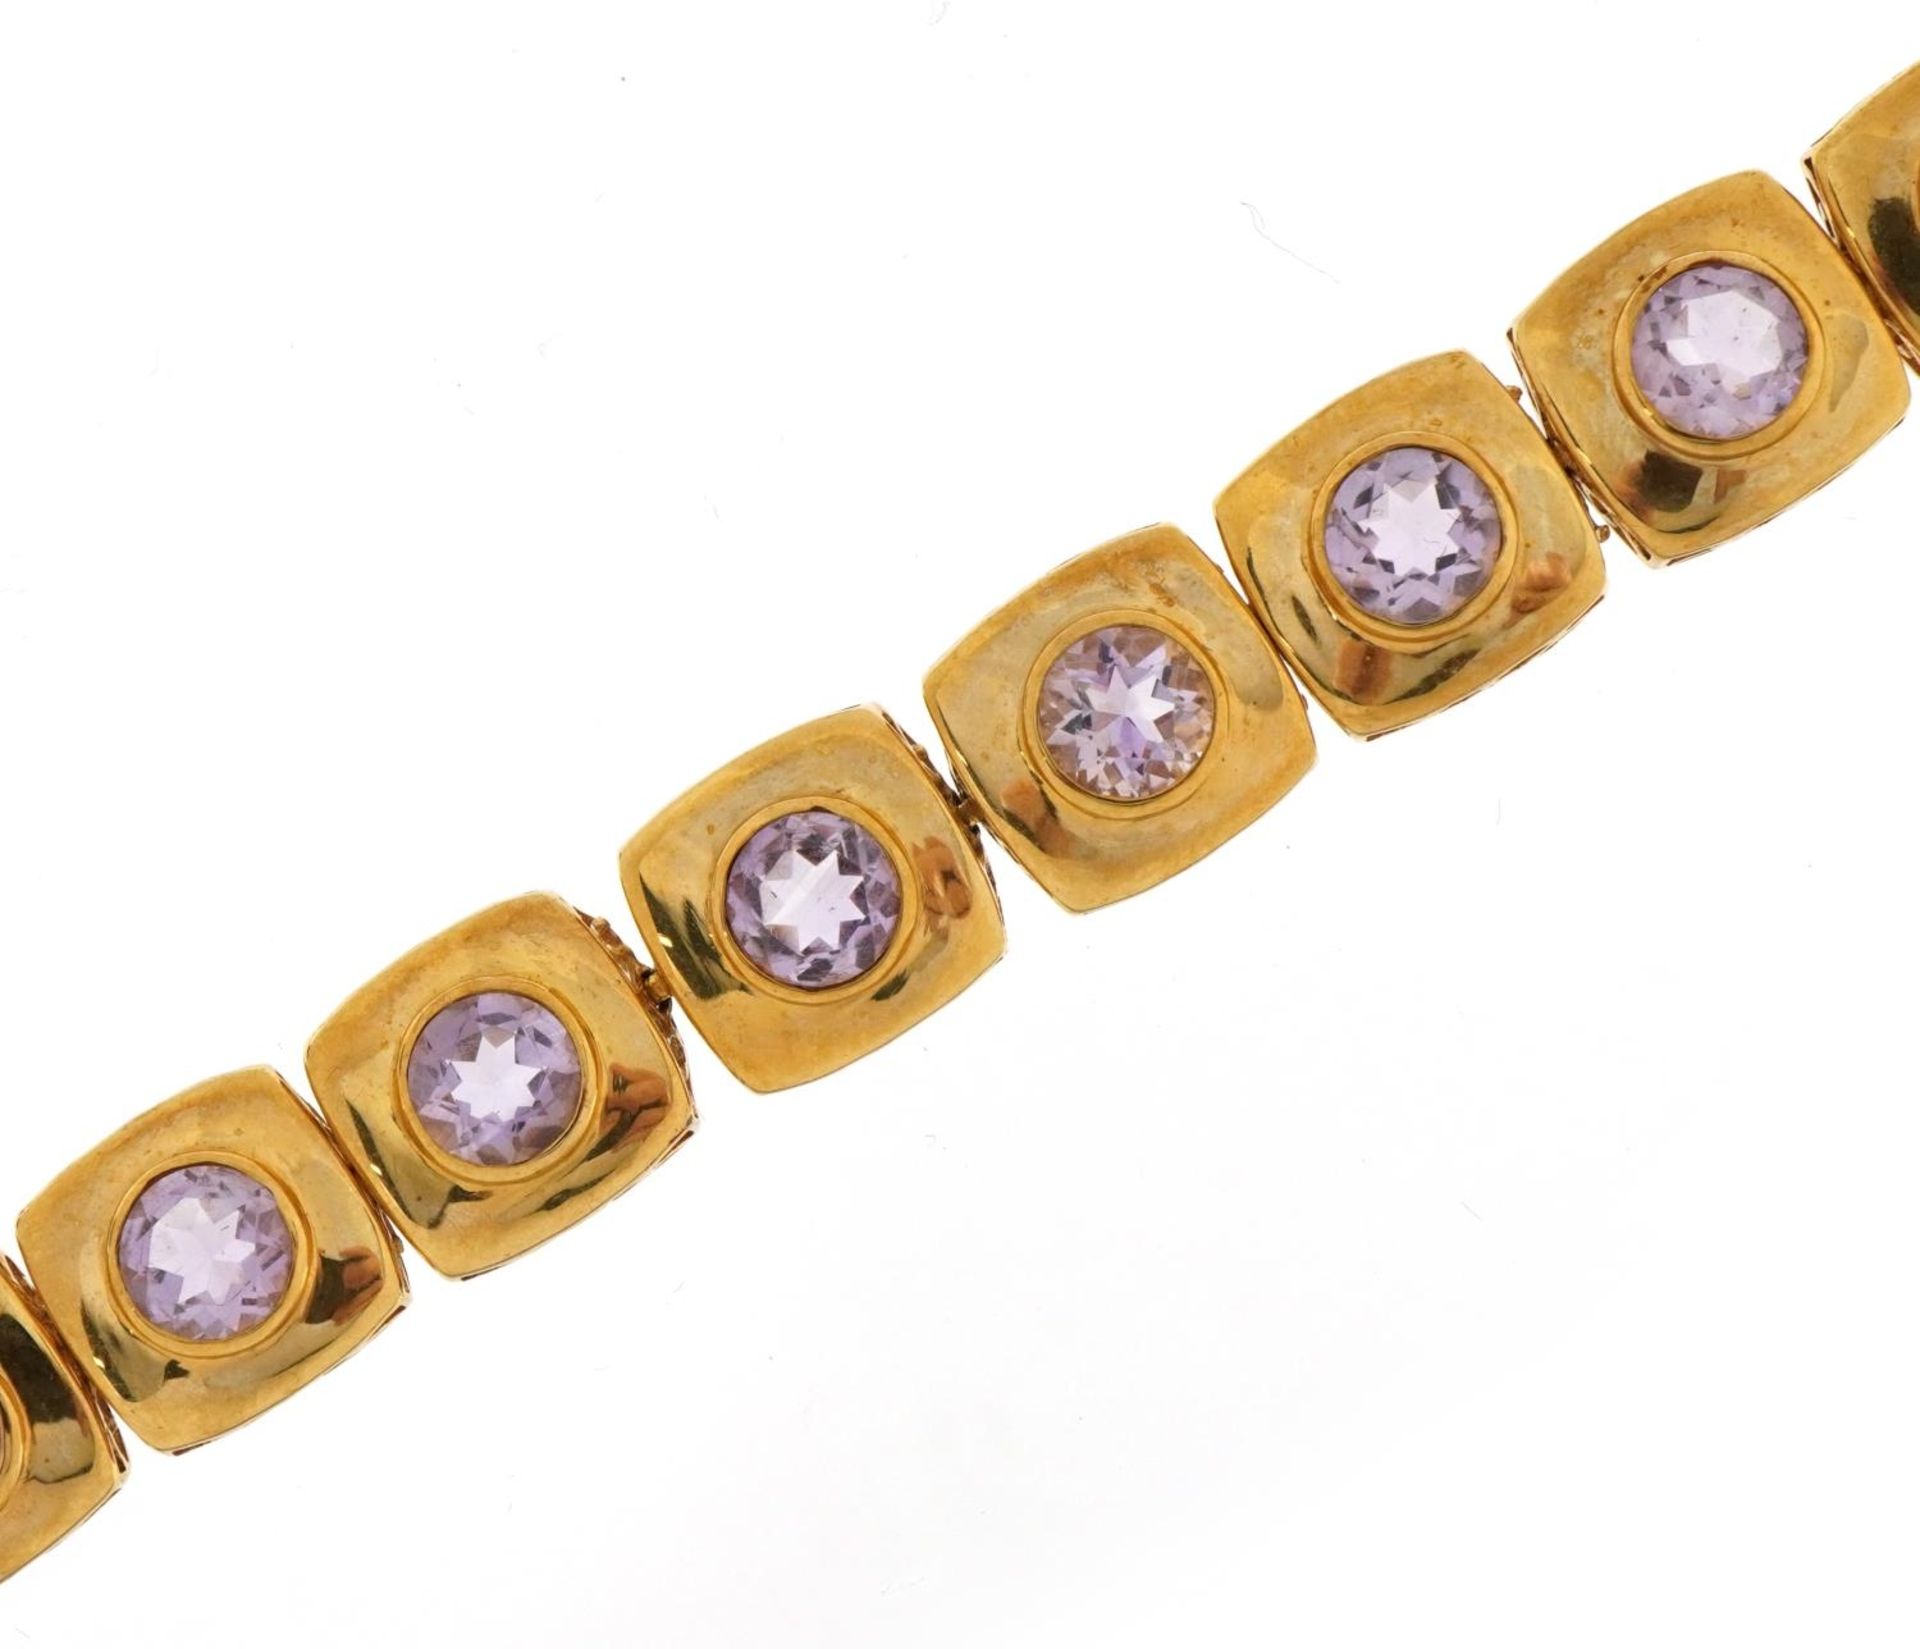 9ct gold bracelet set with pink stones, 19cm in length, 23.4g